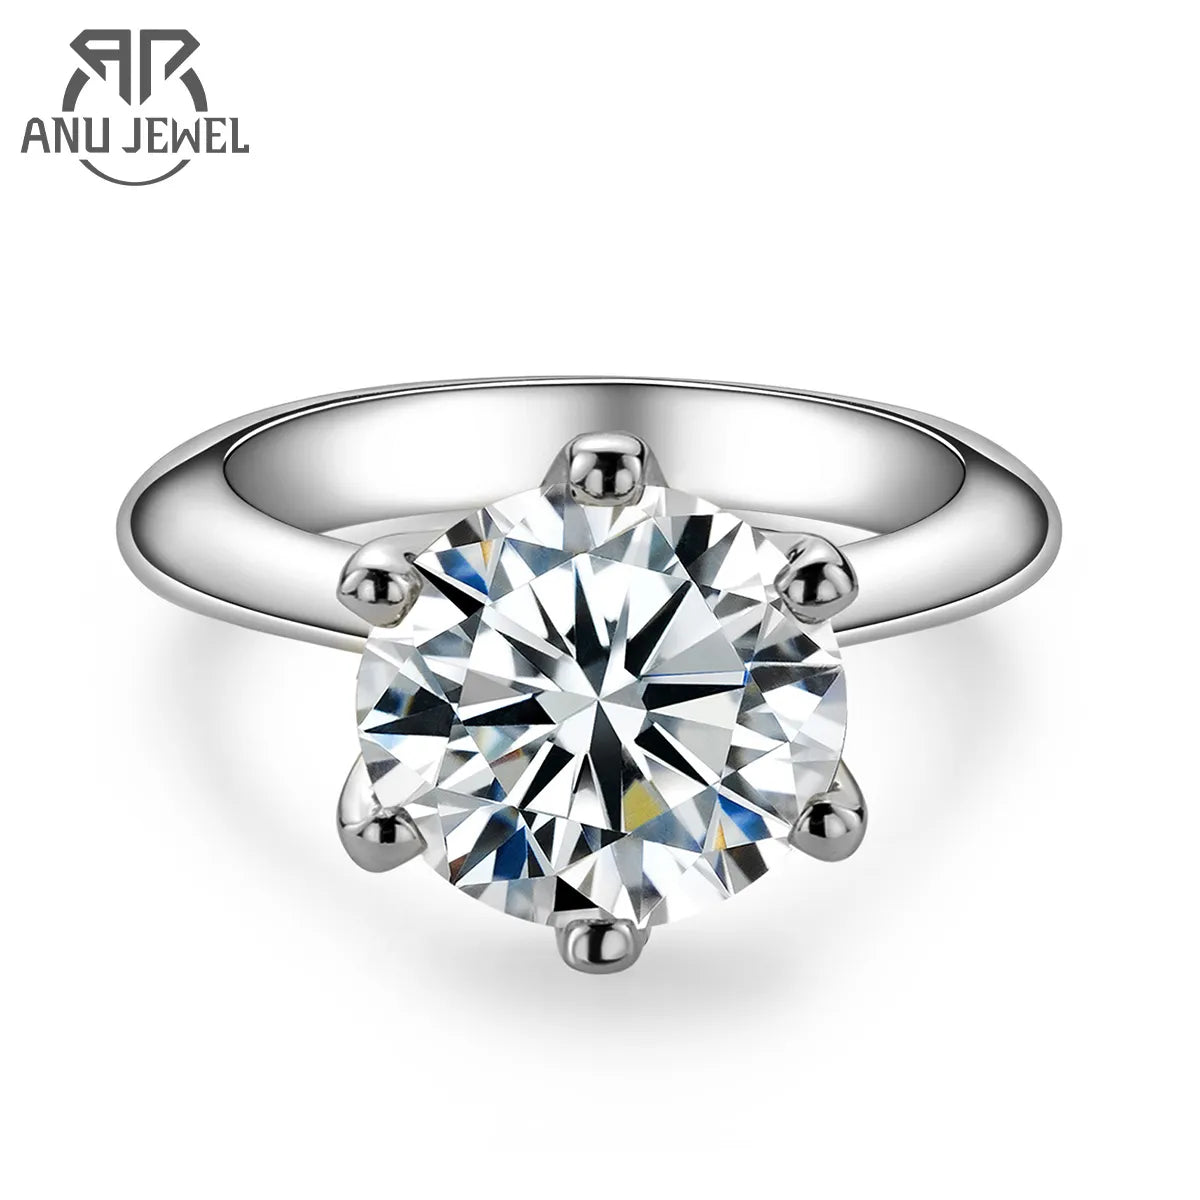 A Moissanite Solitaire Ring: Stunning Engagement Jewelry with a large round-cut moissanite centerpiece, held by six prongs, exemplifying a classic solitaire design. The Maramalive™ logo is in the top left corner.